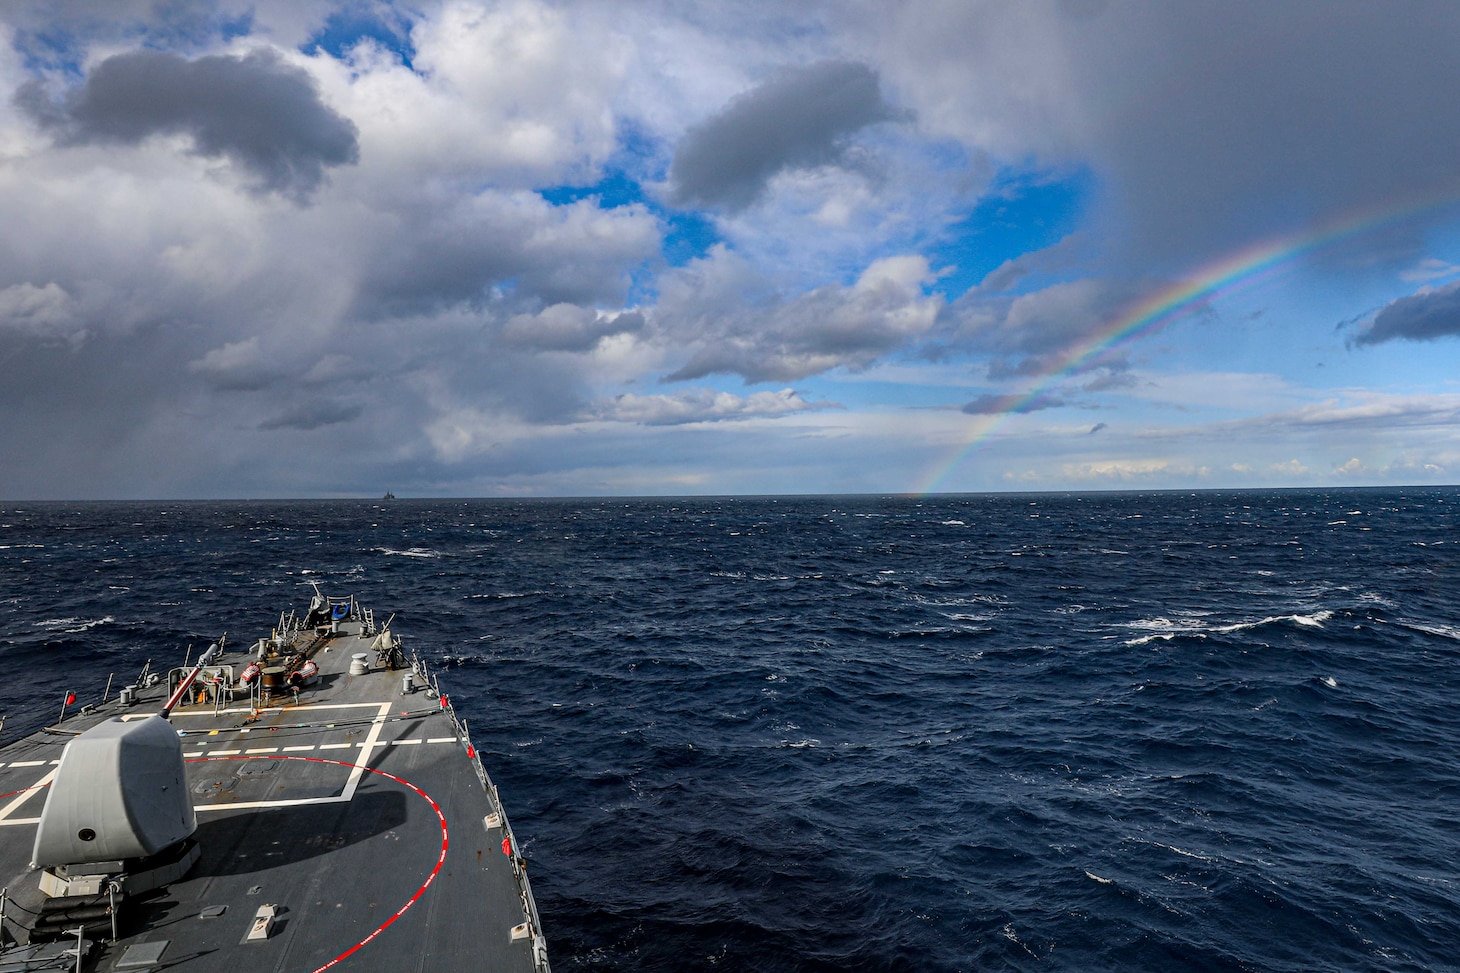 The Arleigh Burke-class guided-missile destroyer USS Porter (DDG 78) prepares for a replenishment-at-sea (RAS) with the Spanish replenishment ship ESPS Cantabria (A 15) during Exercise Polaris on Patrol 10, Nov. 29, 2021.